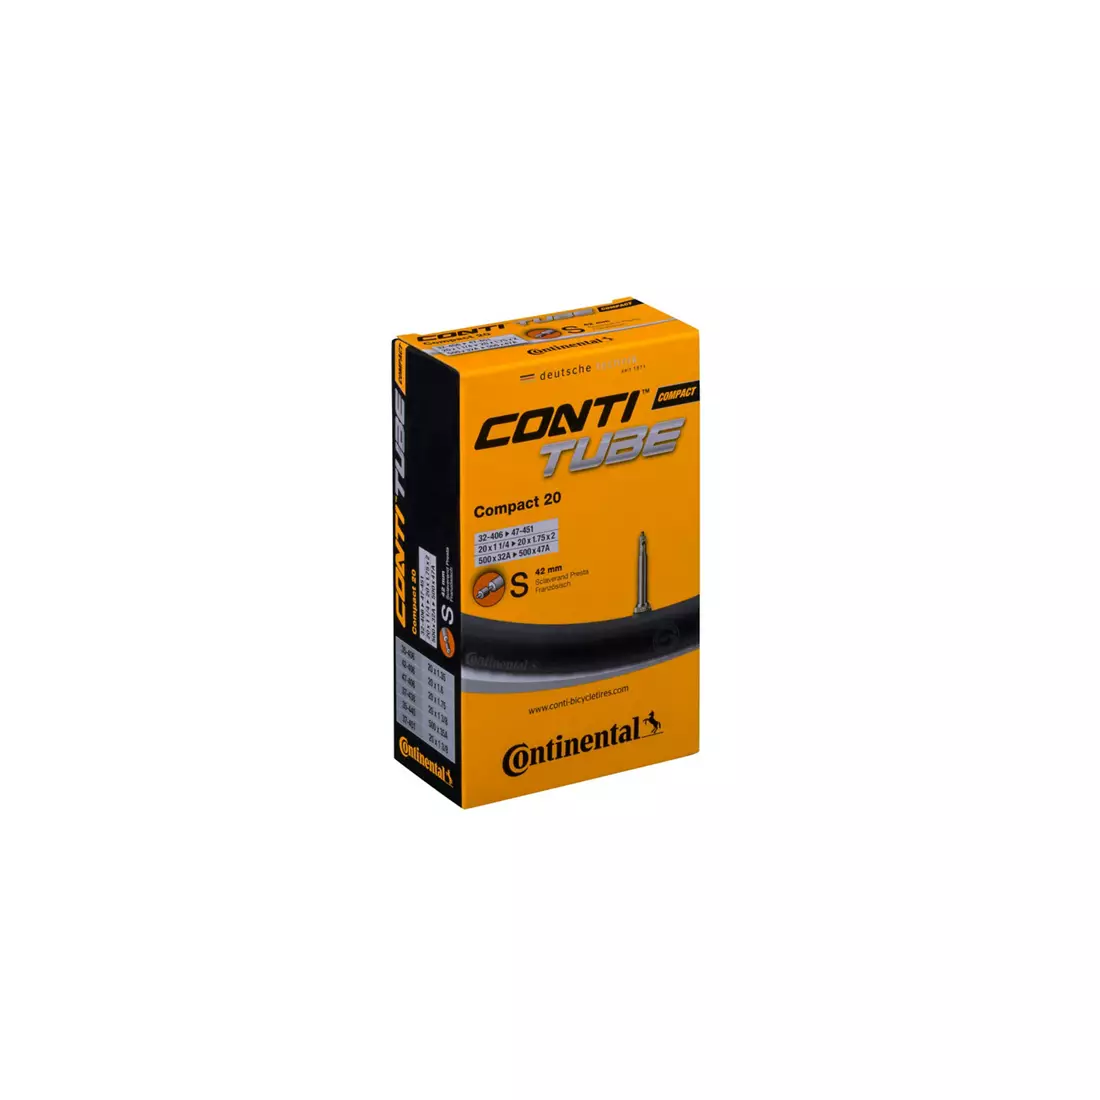 CONTINENTAL COMPACT 20/1,25 bicycle tube with a 42 mm Presta valve